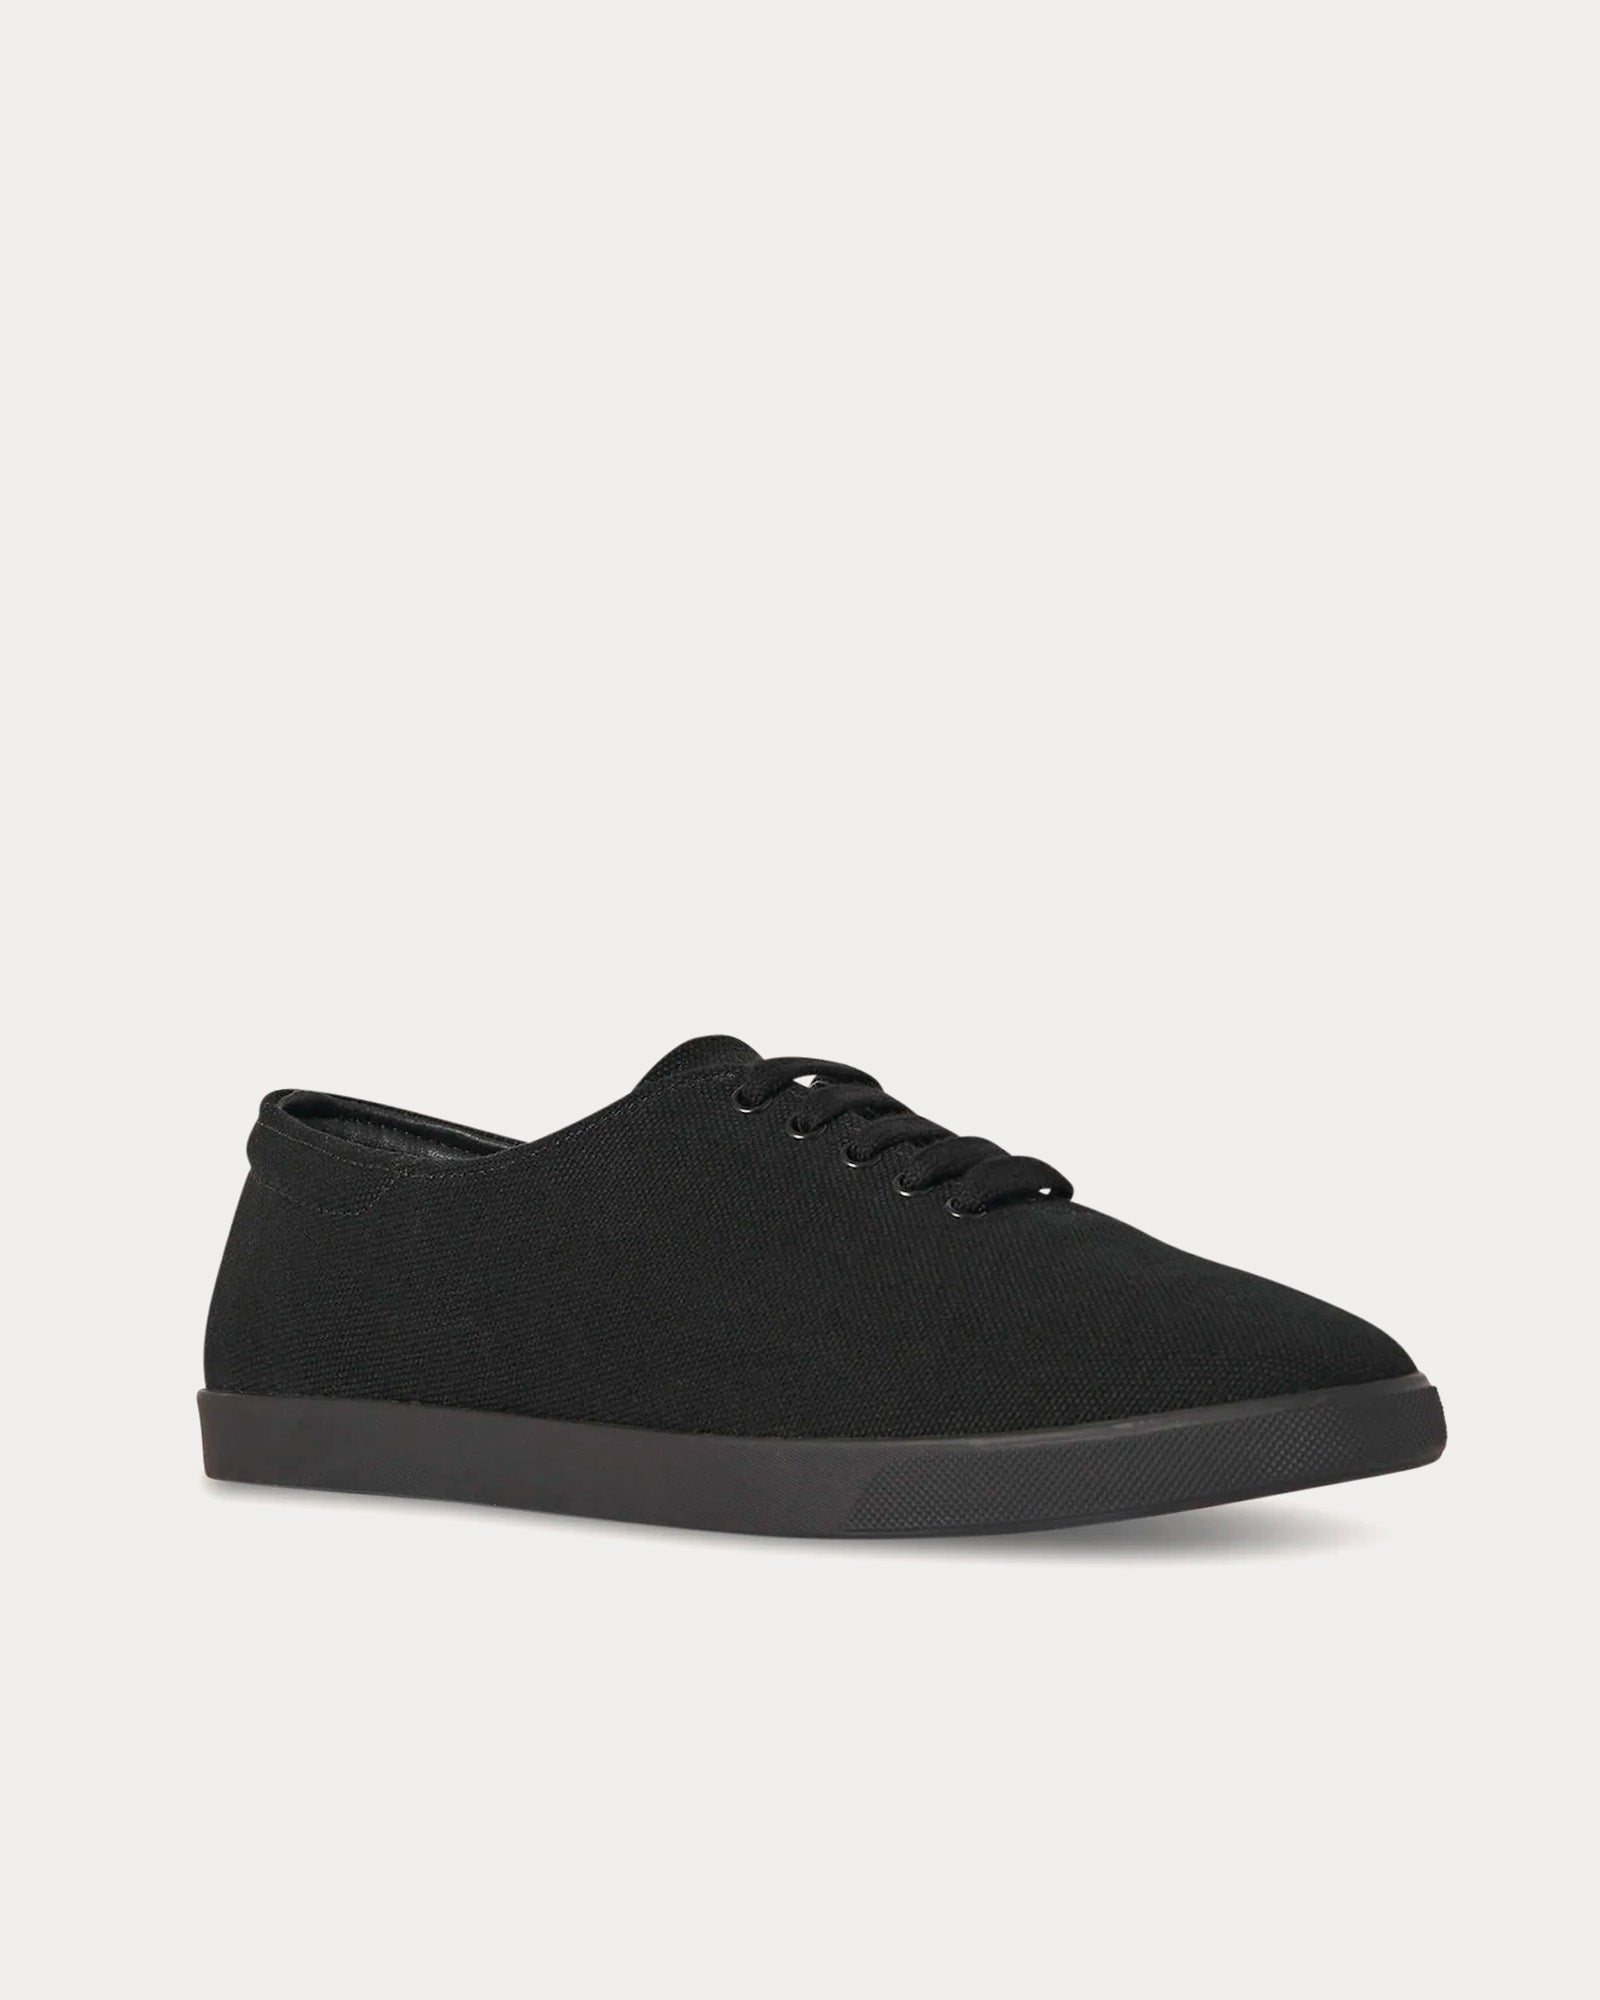 The Row - Sam Canvas Black / Fume Low Top Sneakers